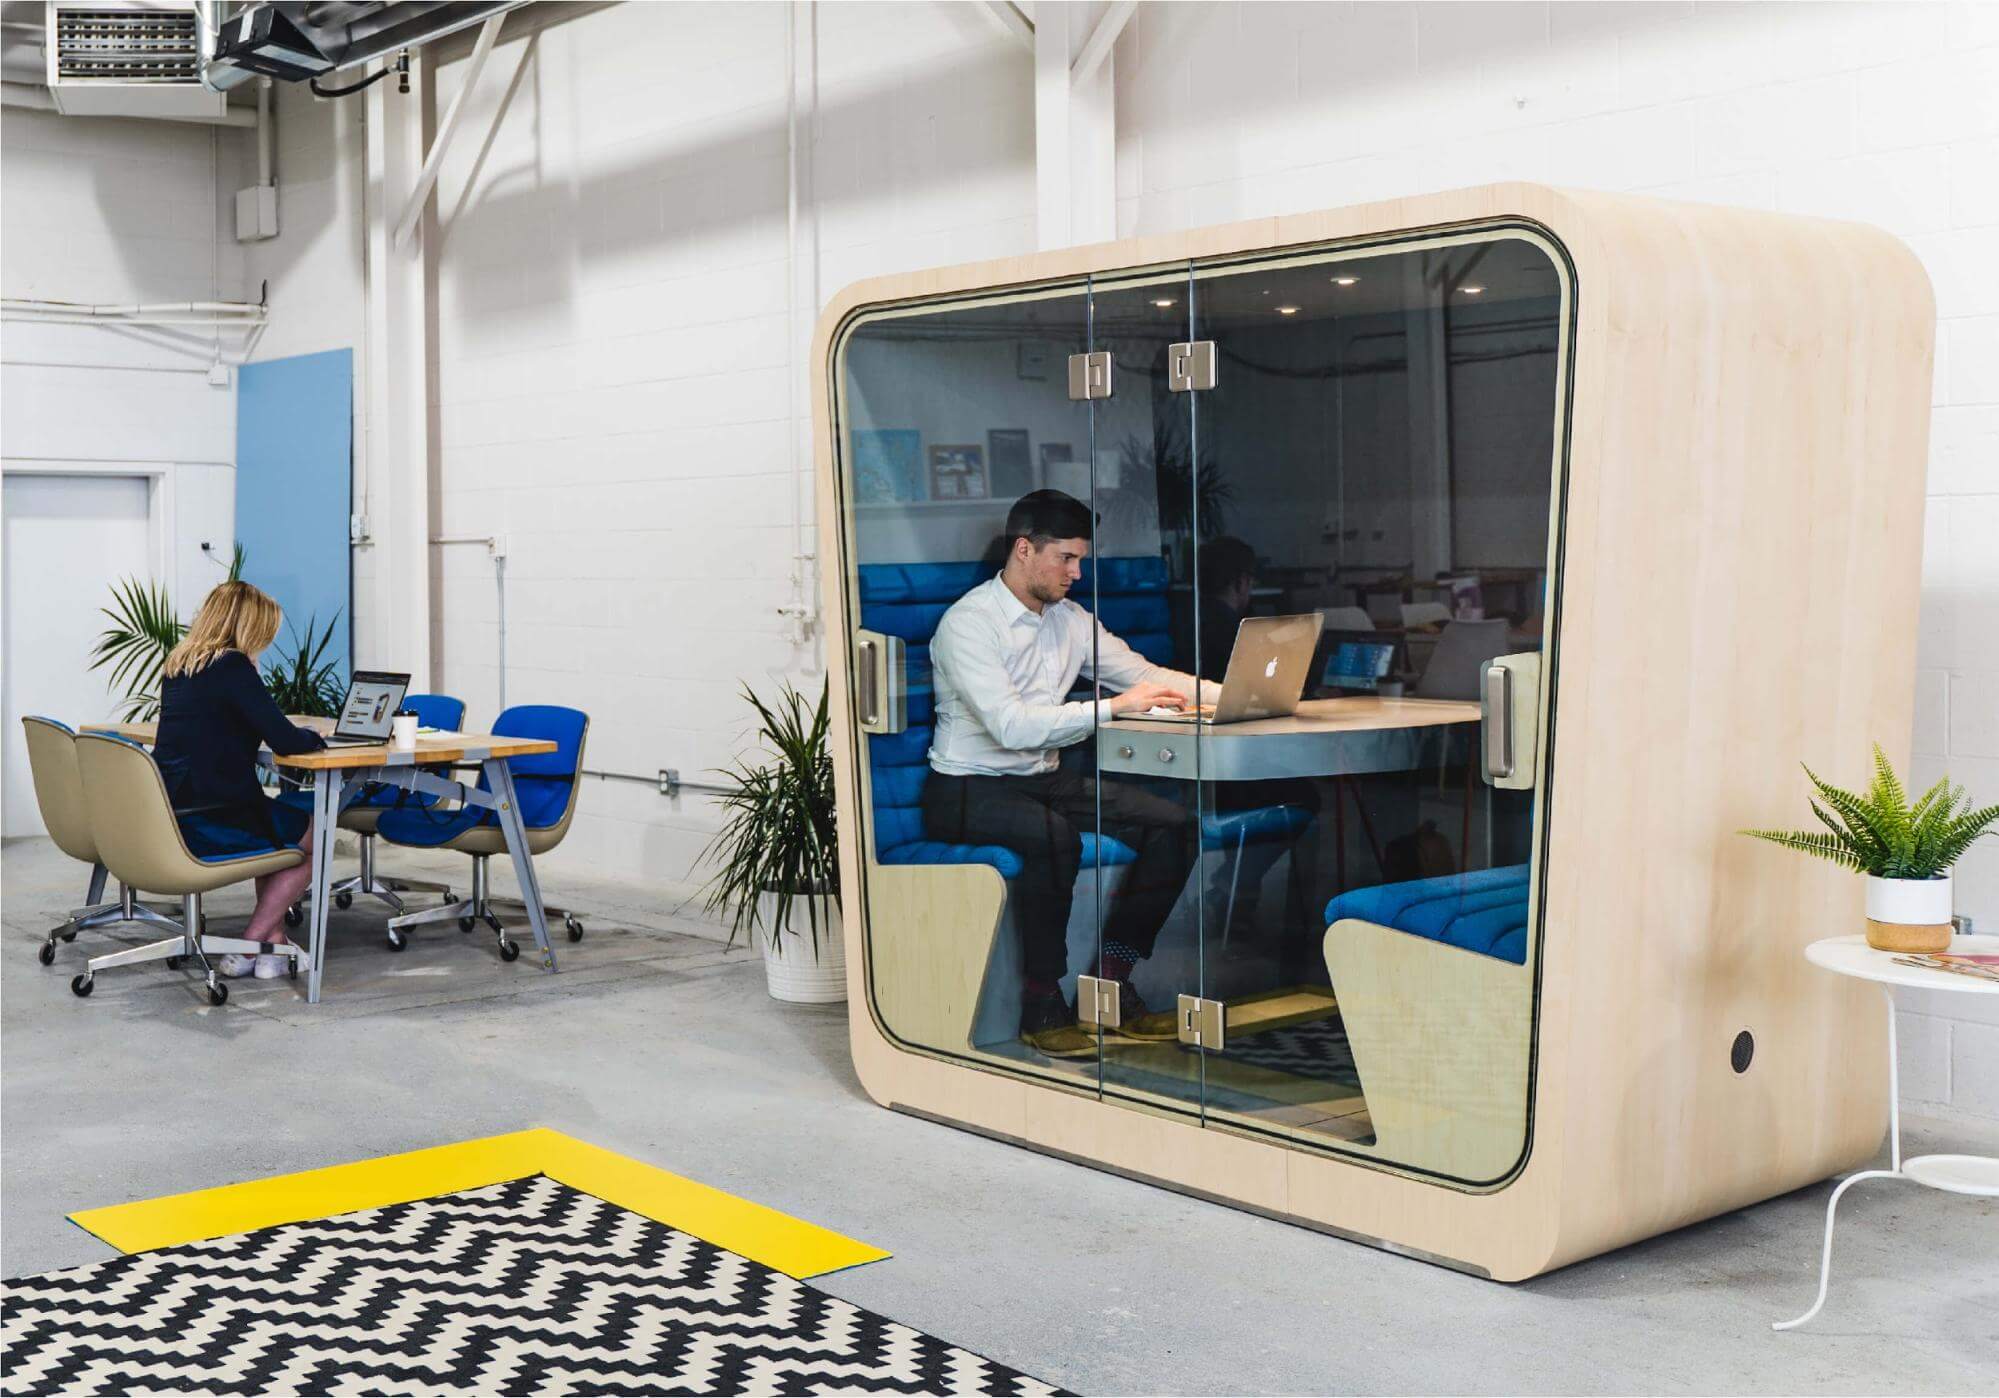 What will be the future of office spaces?